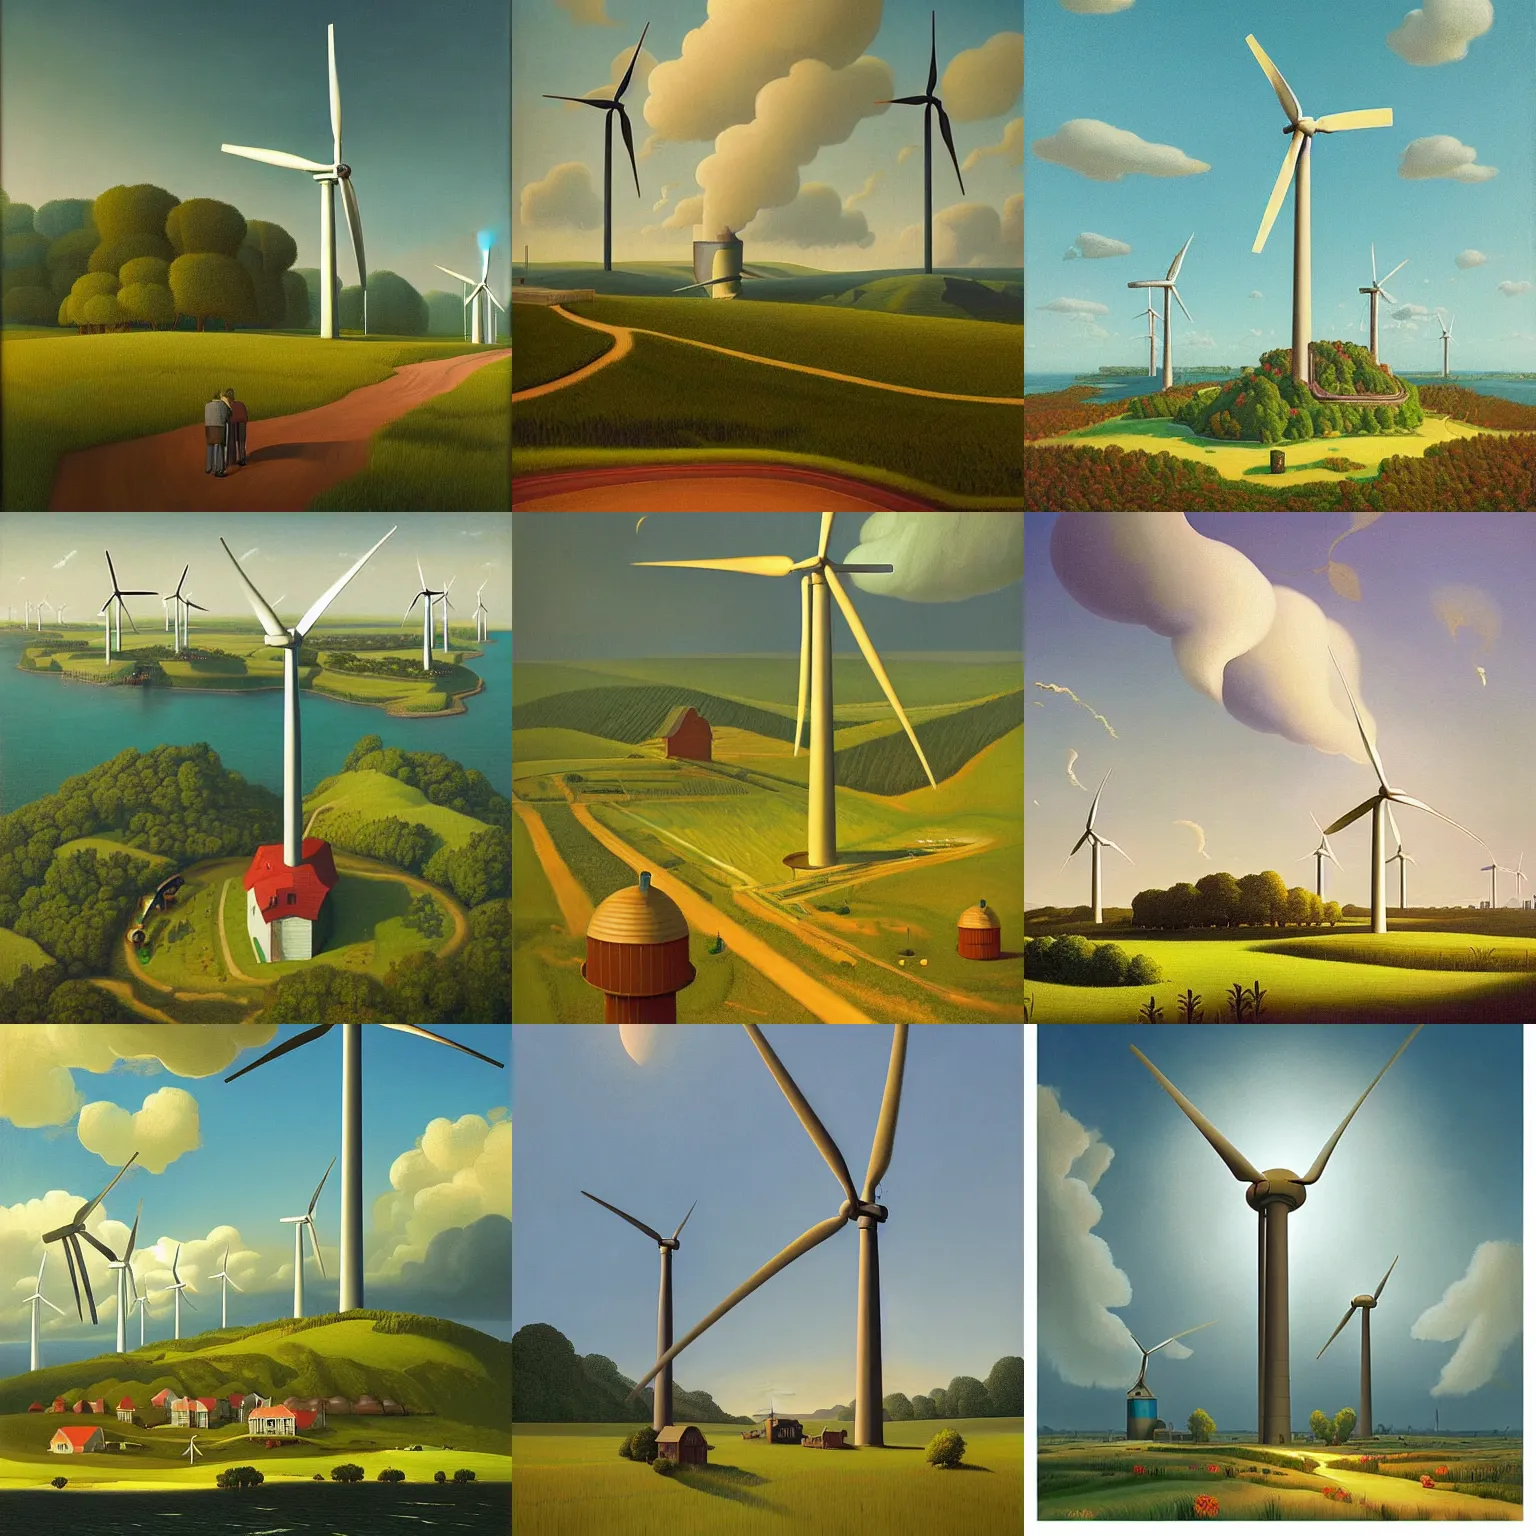 Prompt: A wind turbine power plant in a lush island utopia by Simon Stålenhag and Grant Wood, oil on canvas, heavenly rapture